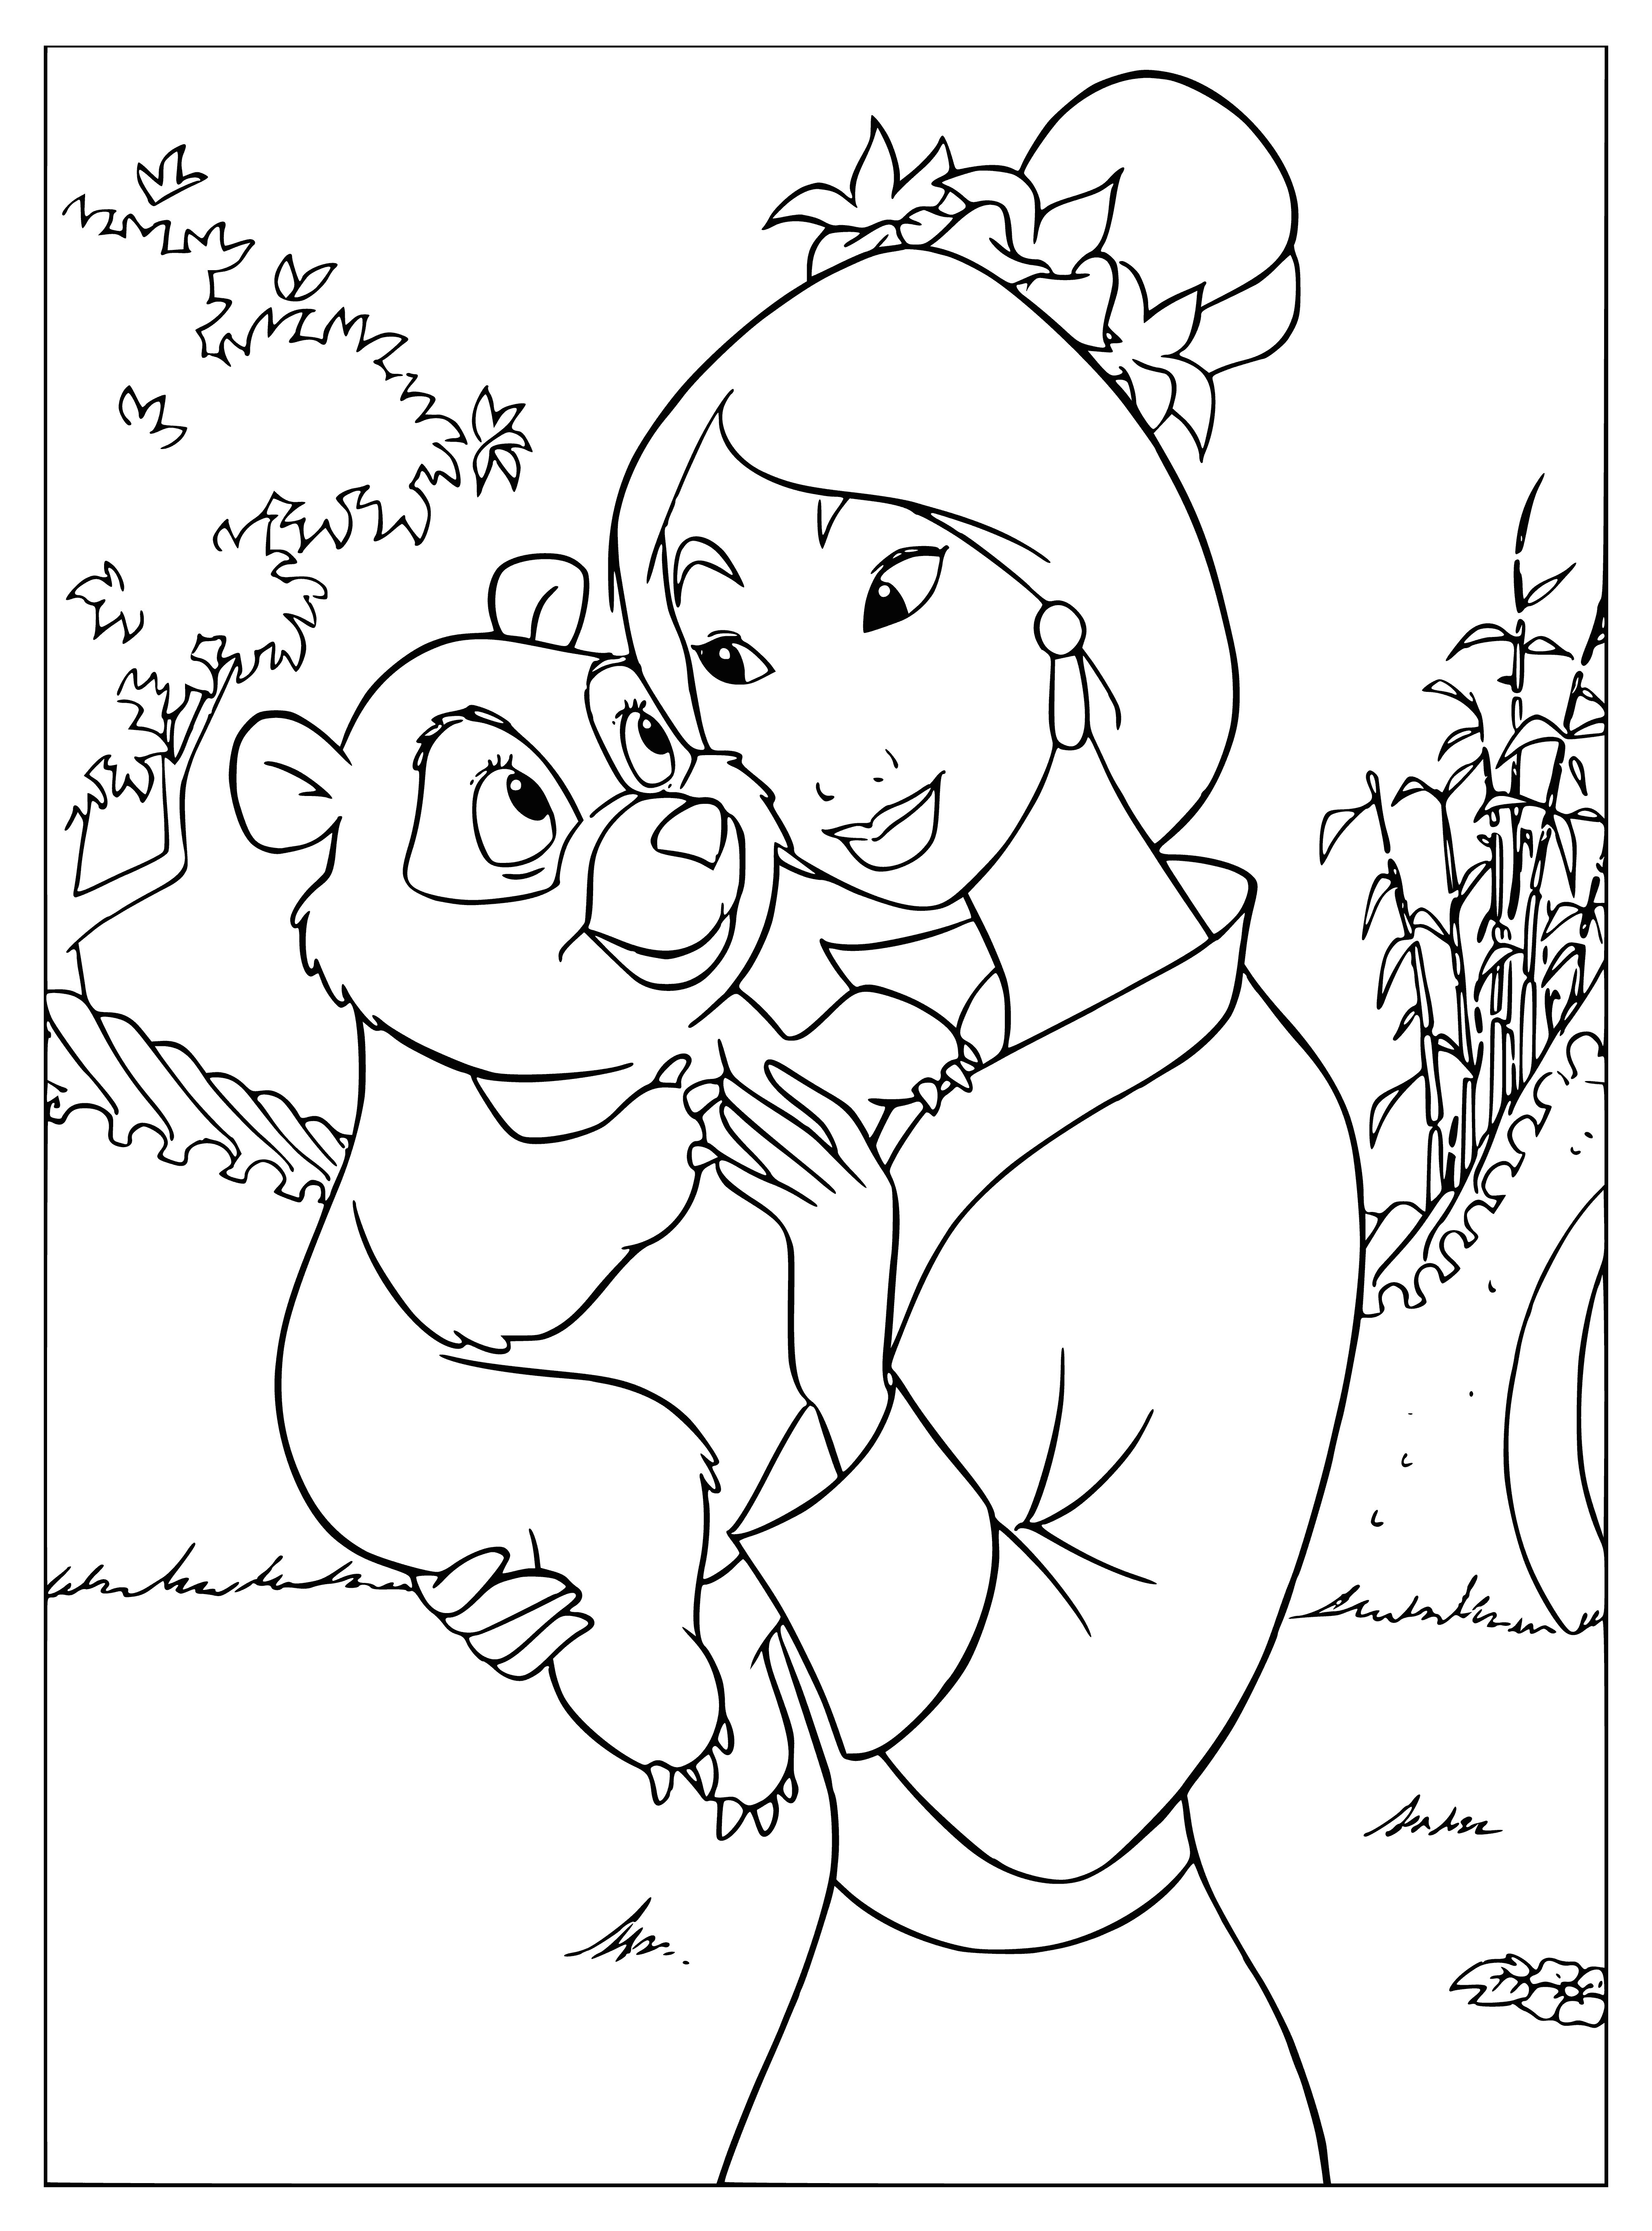 coloring page: Mulan stands among a giant panda in Chinese attire with sword in hand, ready for battle.